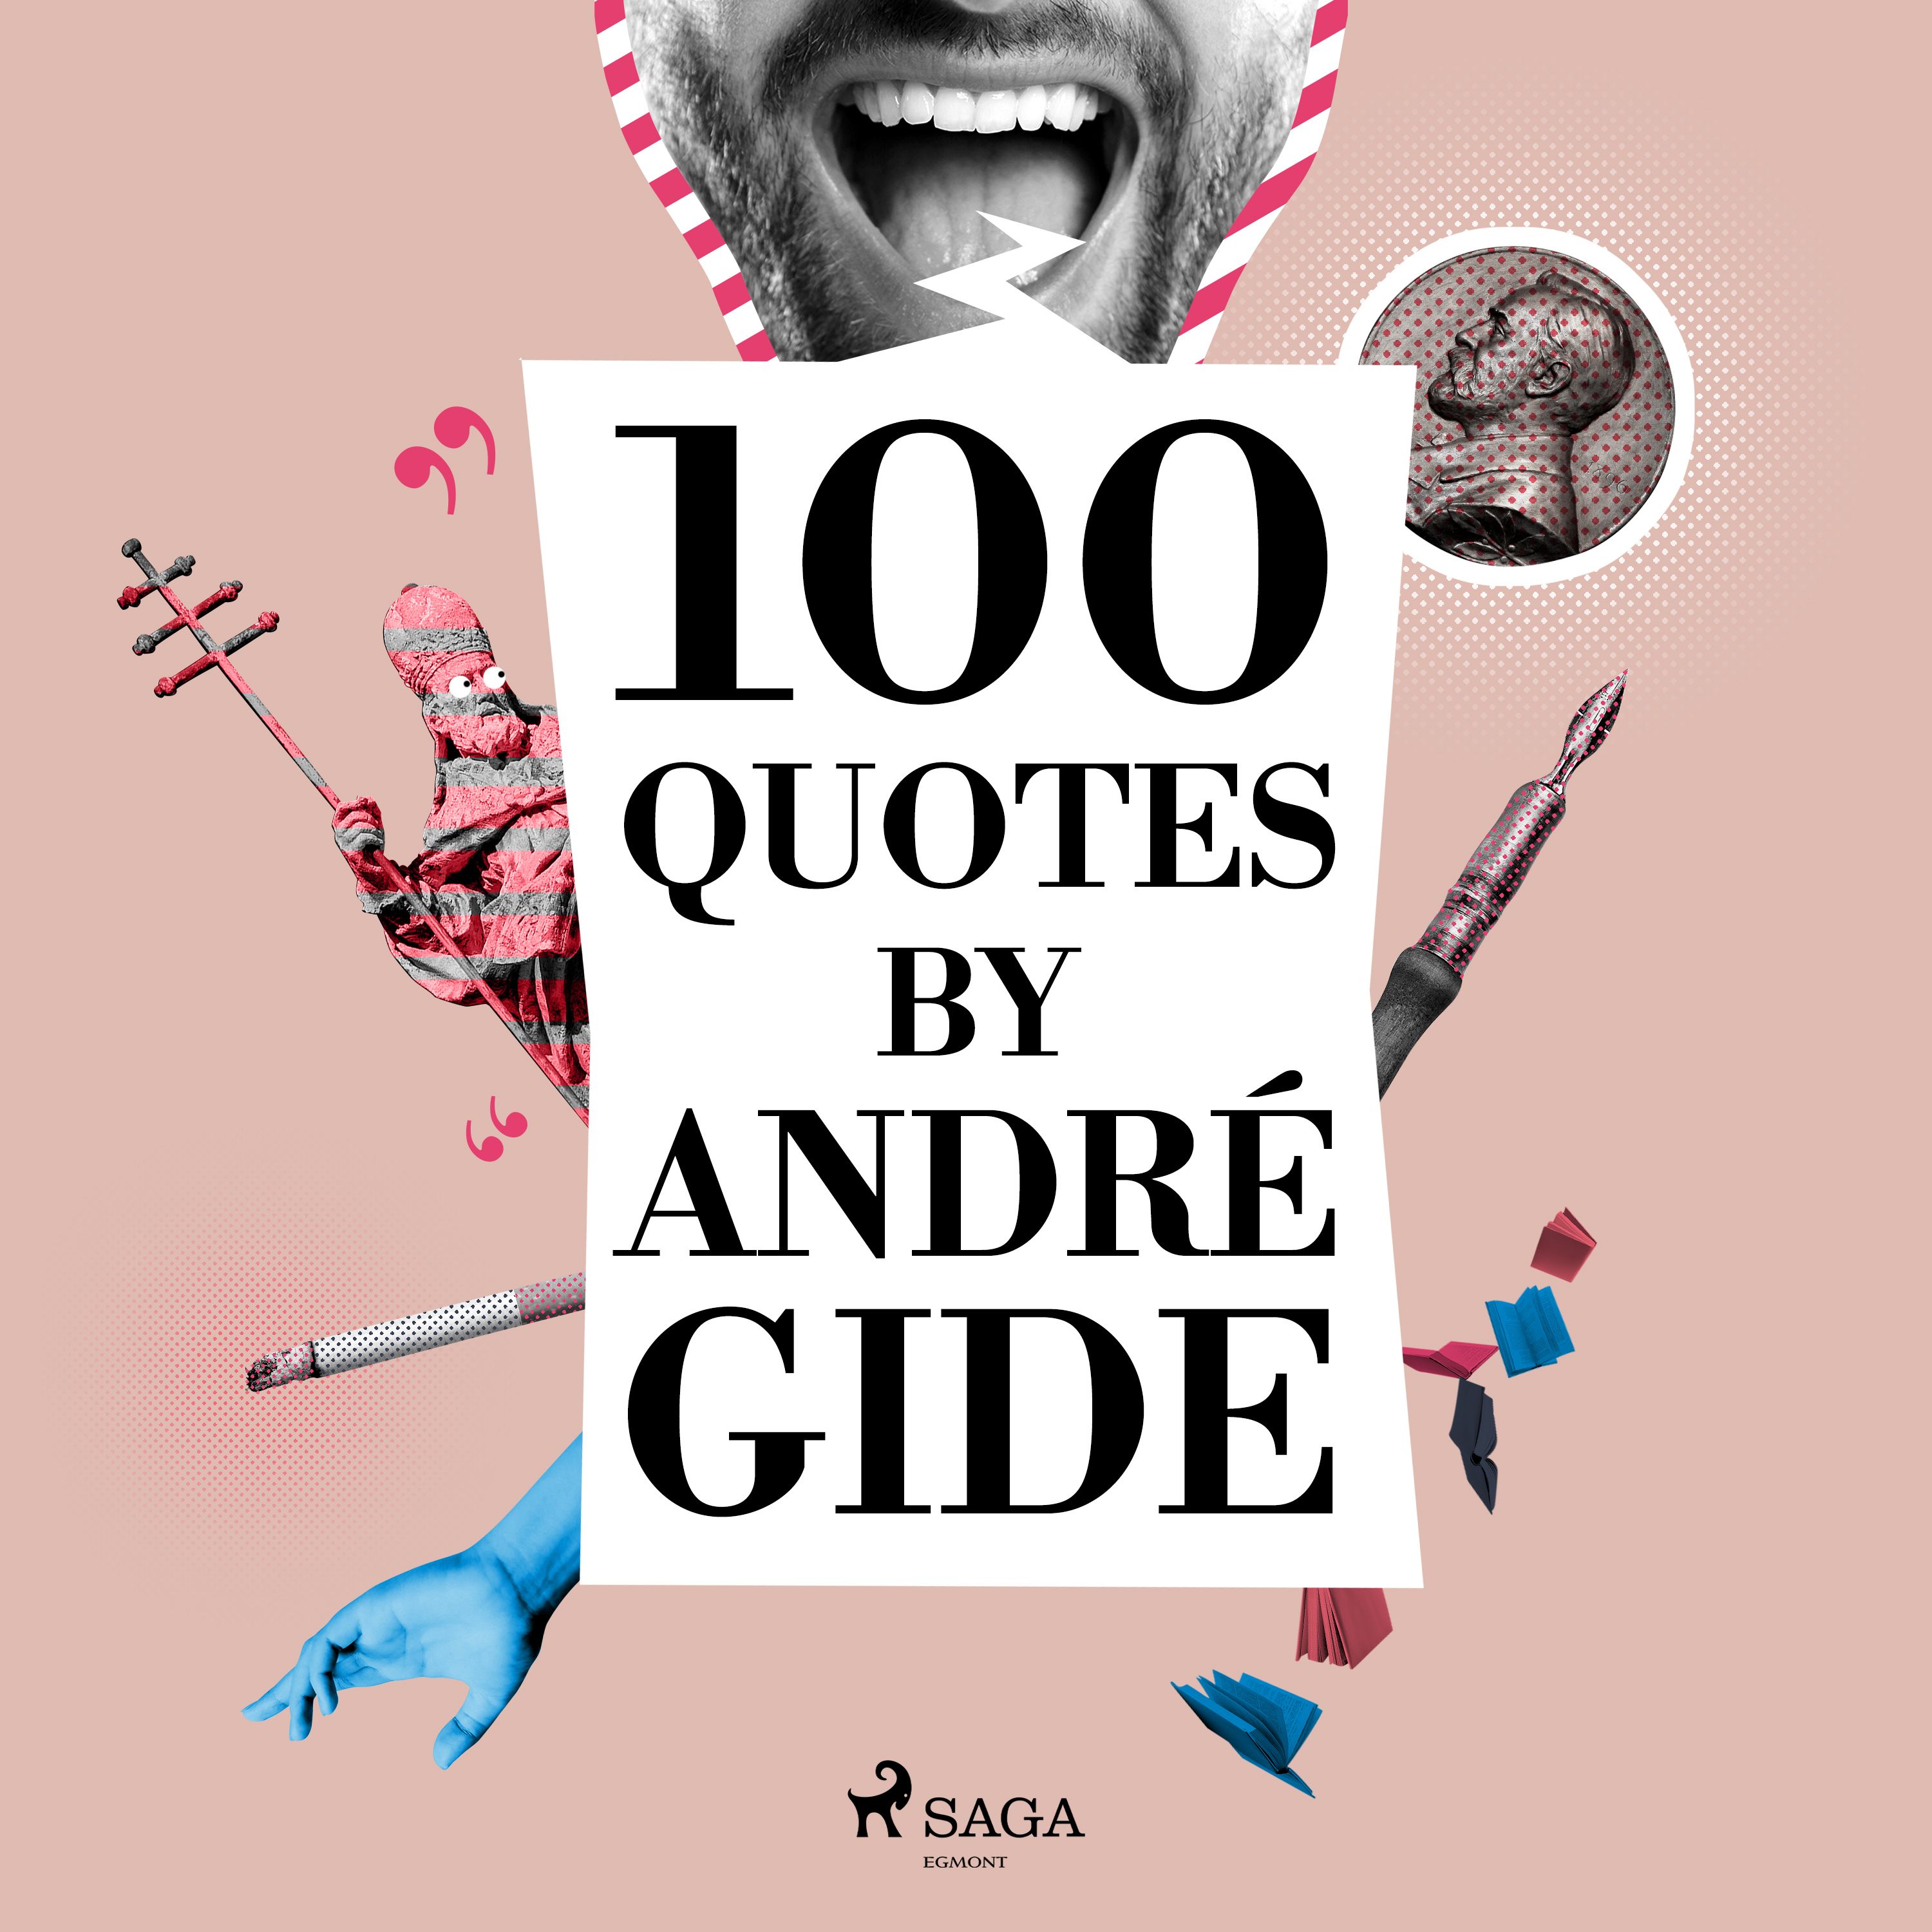 100 Quotes by André Gide, audiobook by André Gide